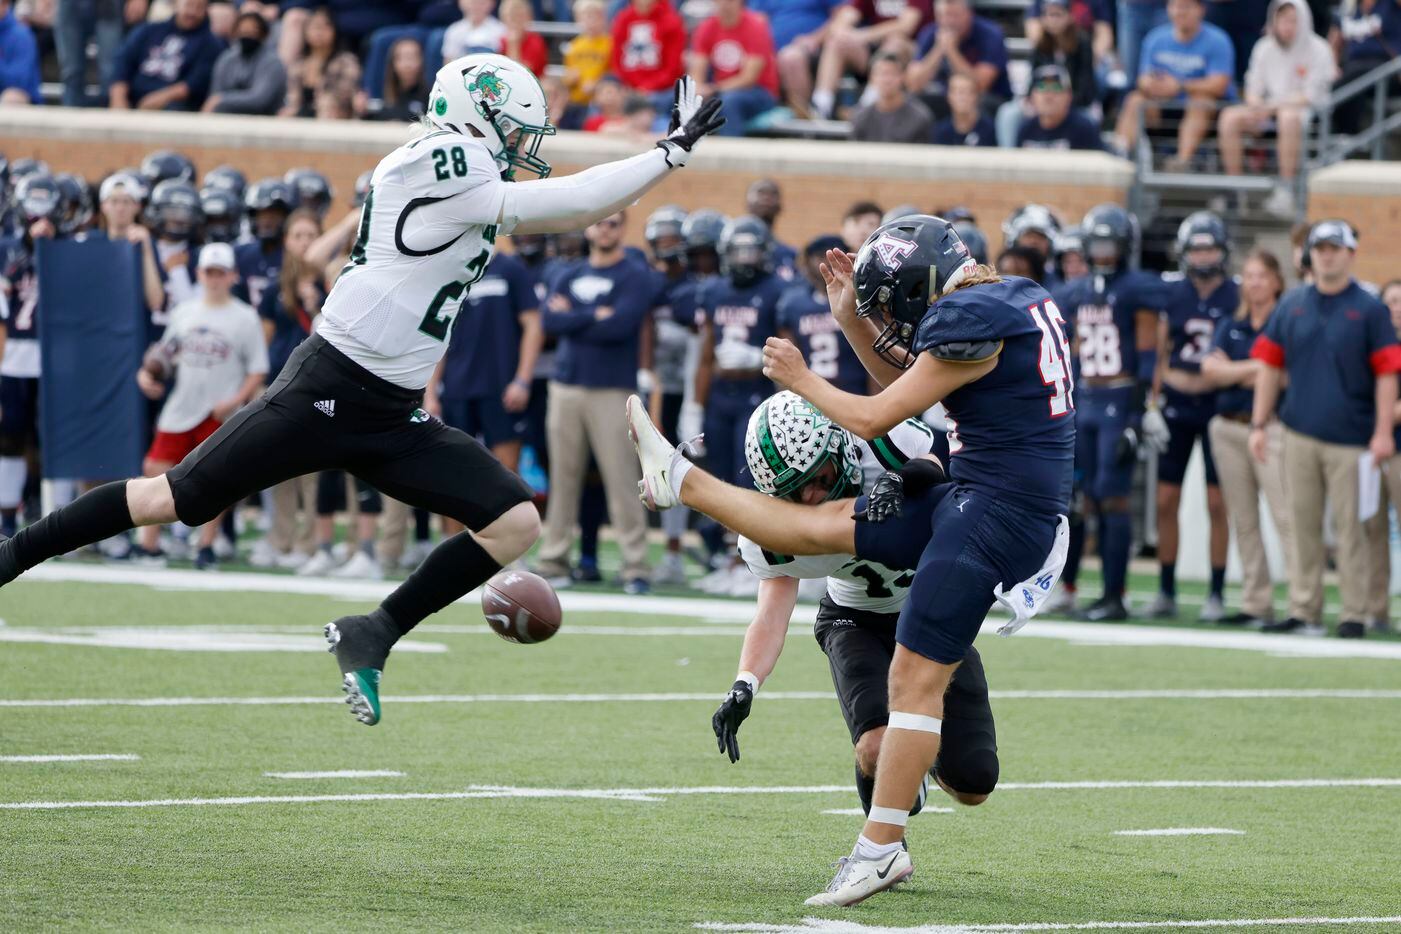 Southlake’s Aaron Scherp (28) and Logan Anderson pressure Allen punter Carter Colaluca (46) during the first half of a Class 6A Division I Region I final high school football game in Denton, Texas on Saturday, Dec. 4, 2021. (Michael Ainsworth/Special Contributor)